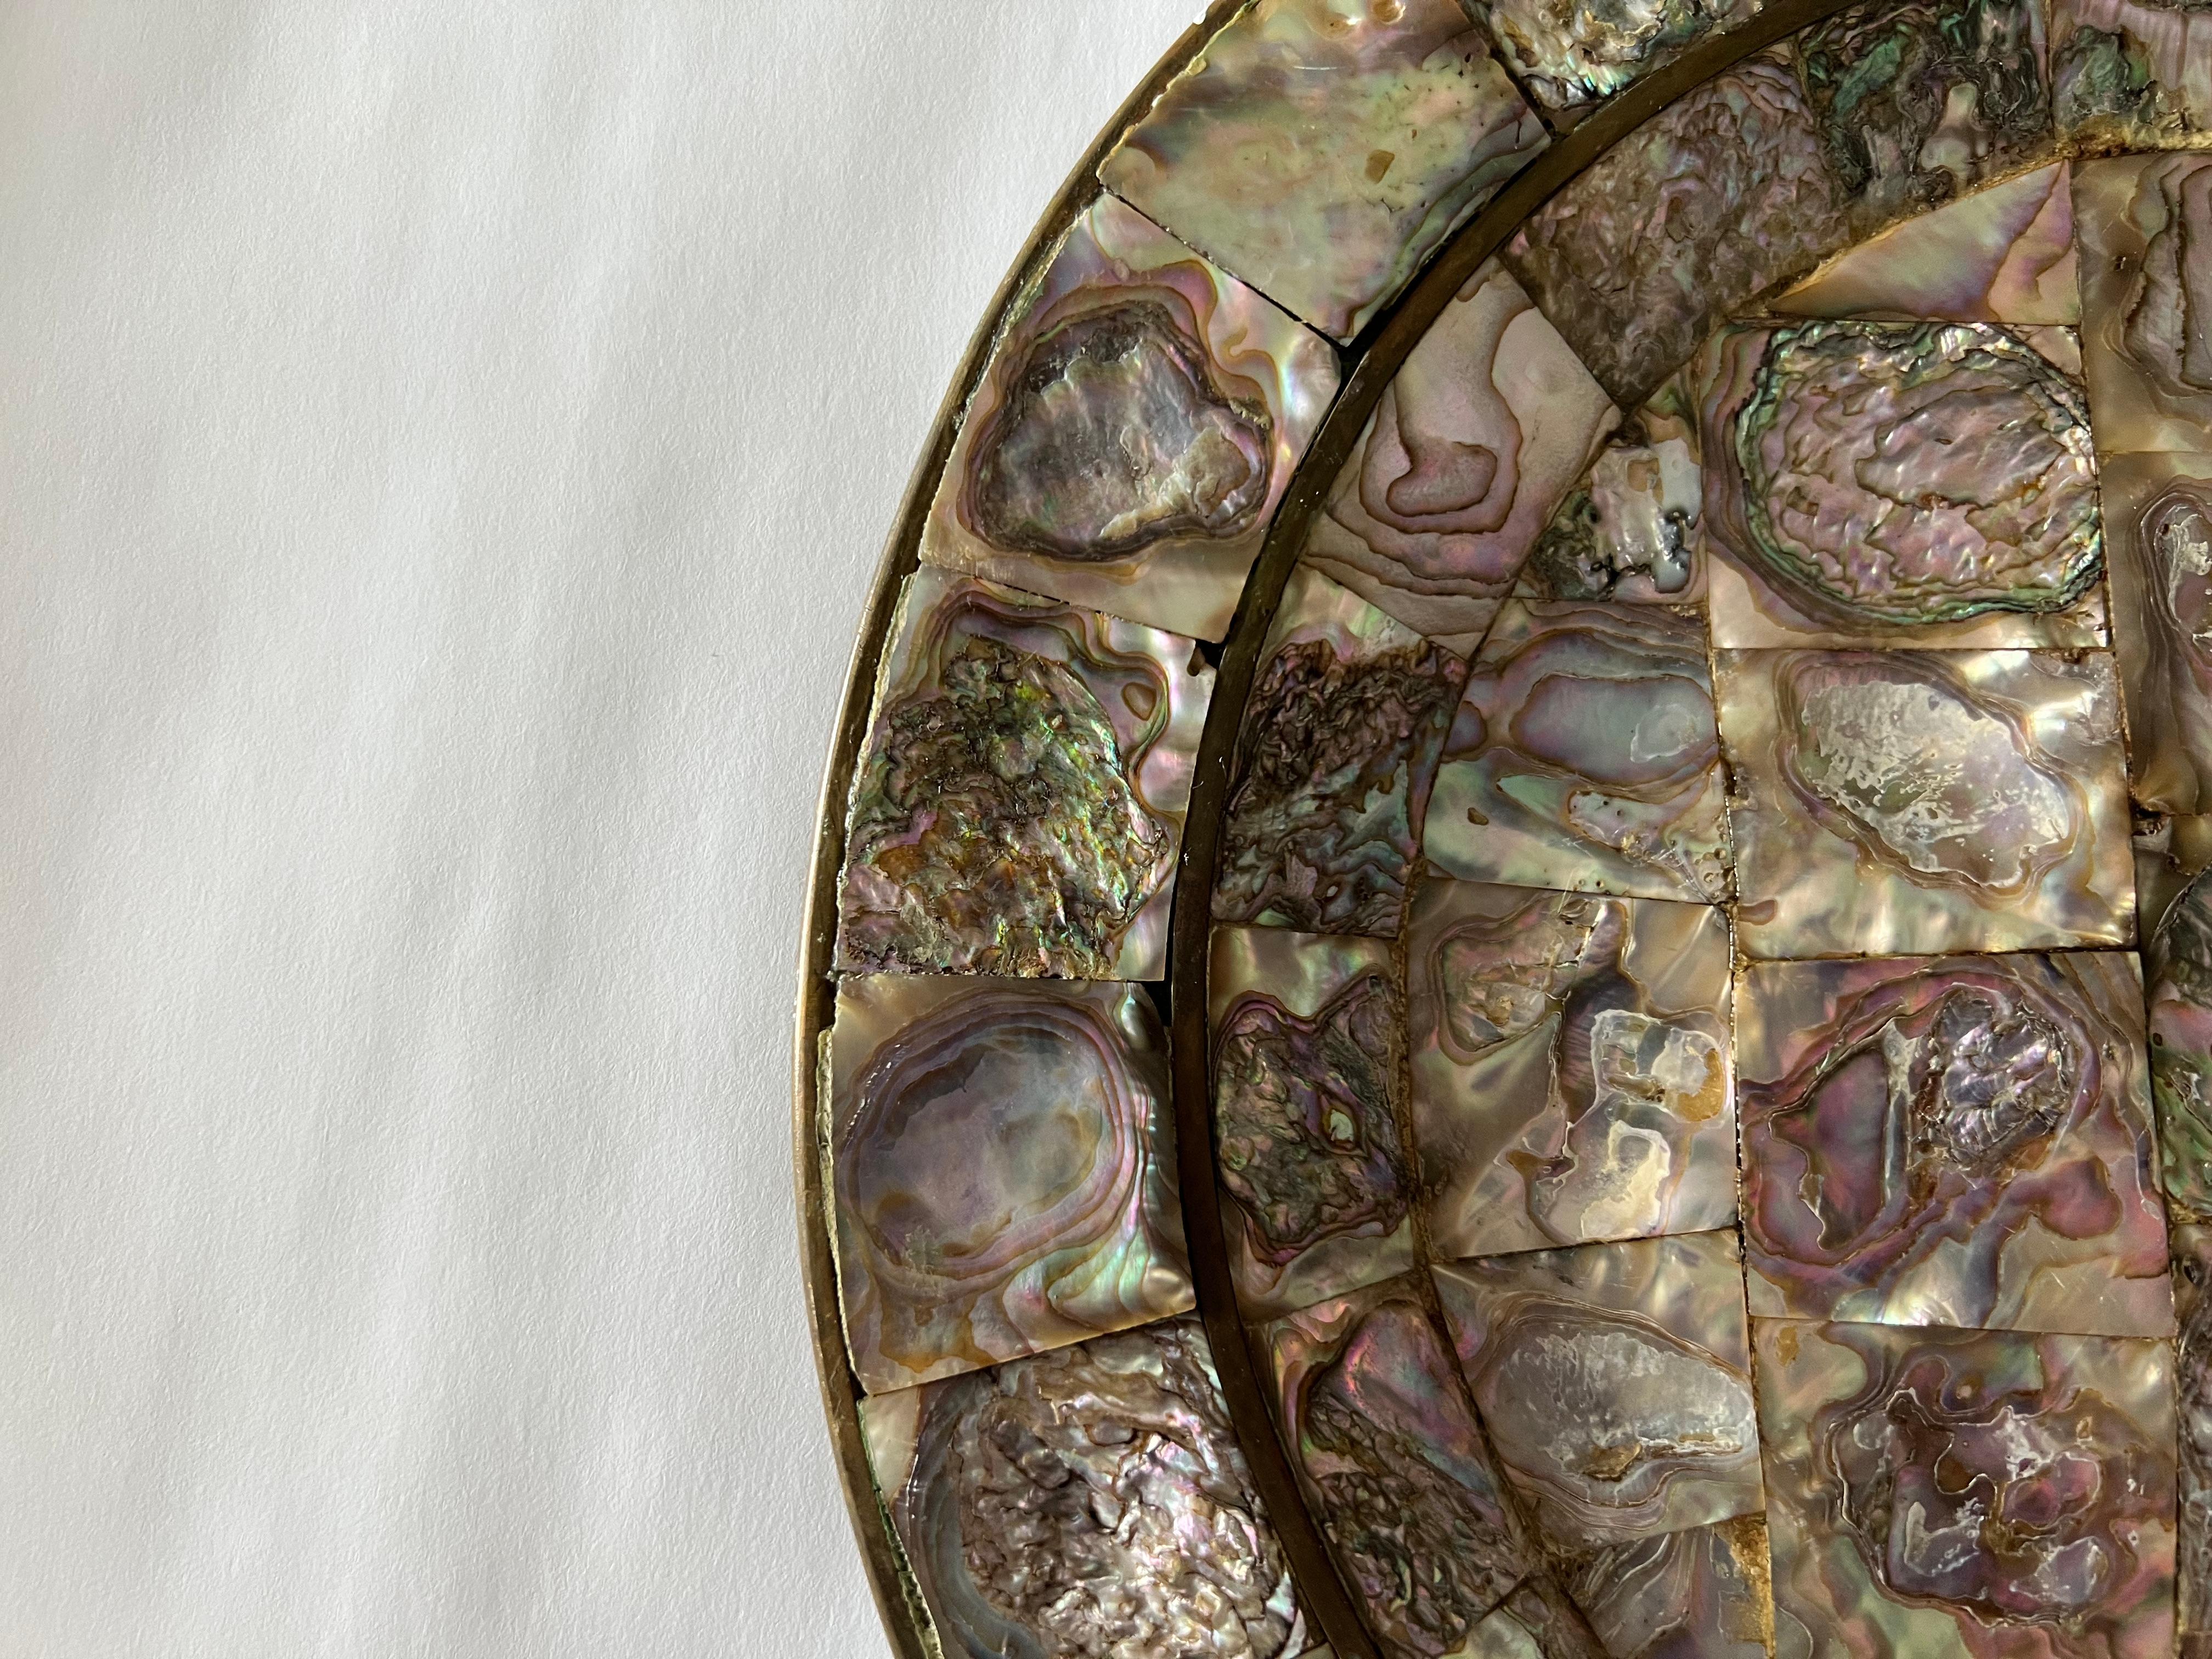 Mexican Los Castillos Style Mosaic of Abalone Shells on Copper Platter, 1950s, Mexico For Sale